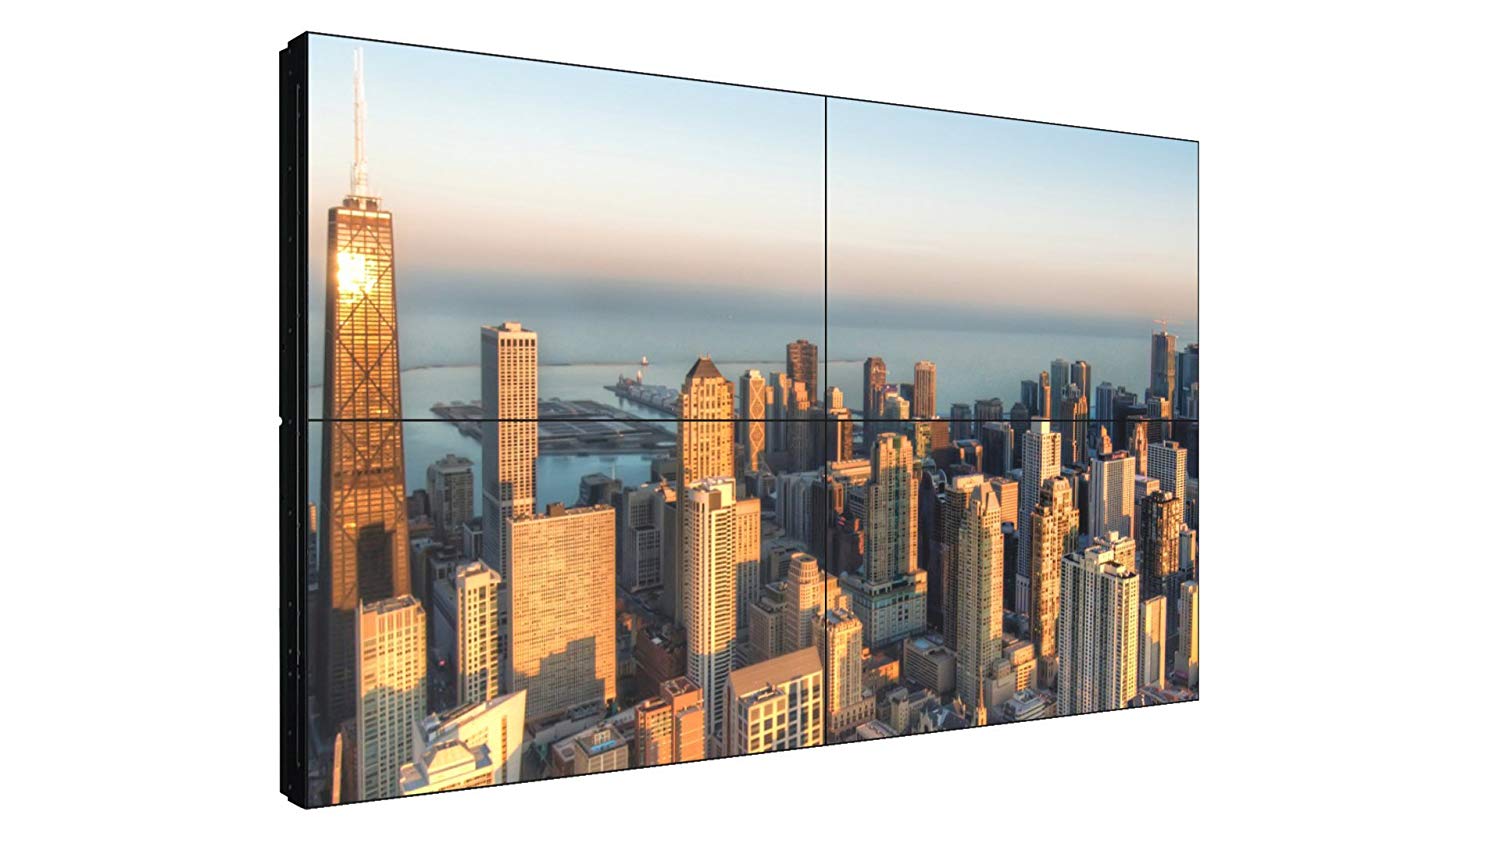 Starview Video Wall 2x2x55 (Price: $7,795)